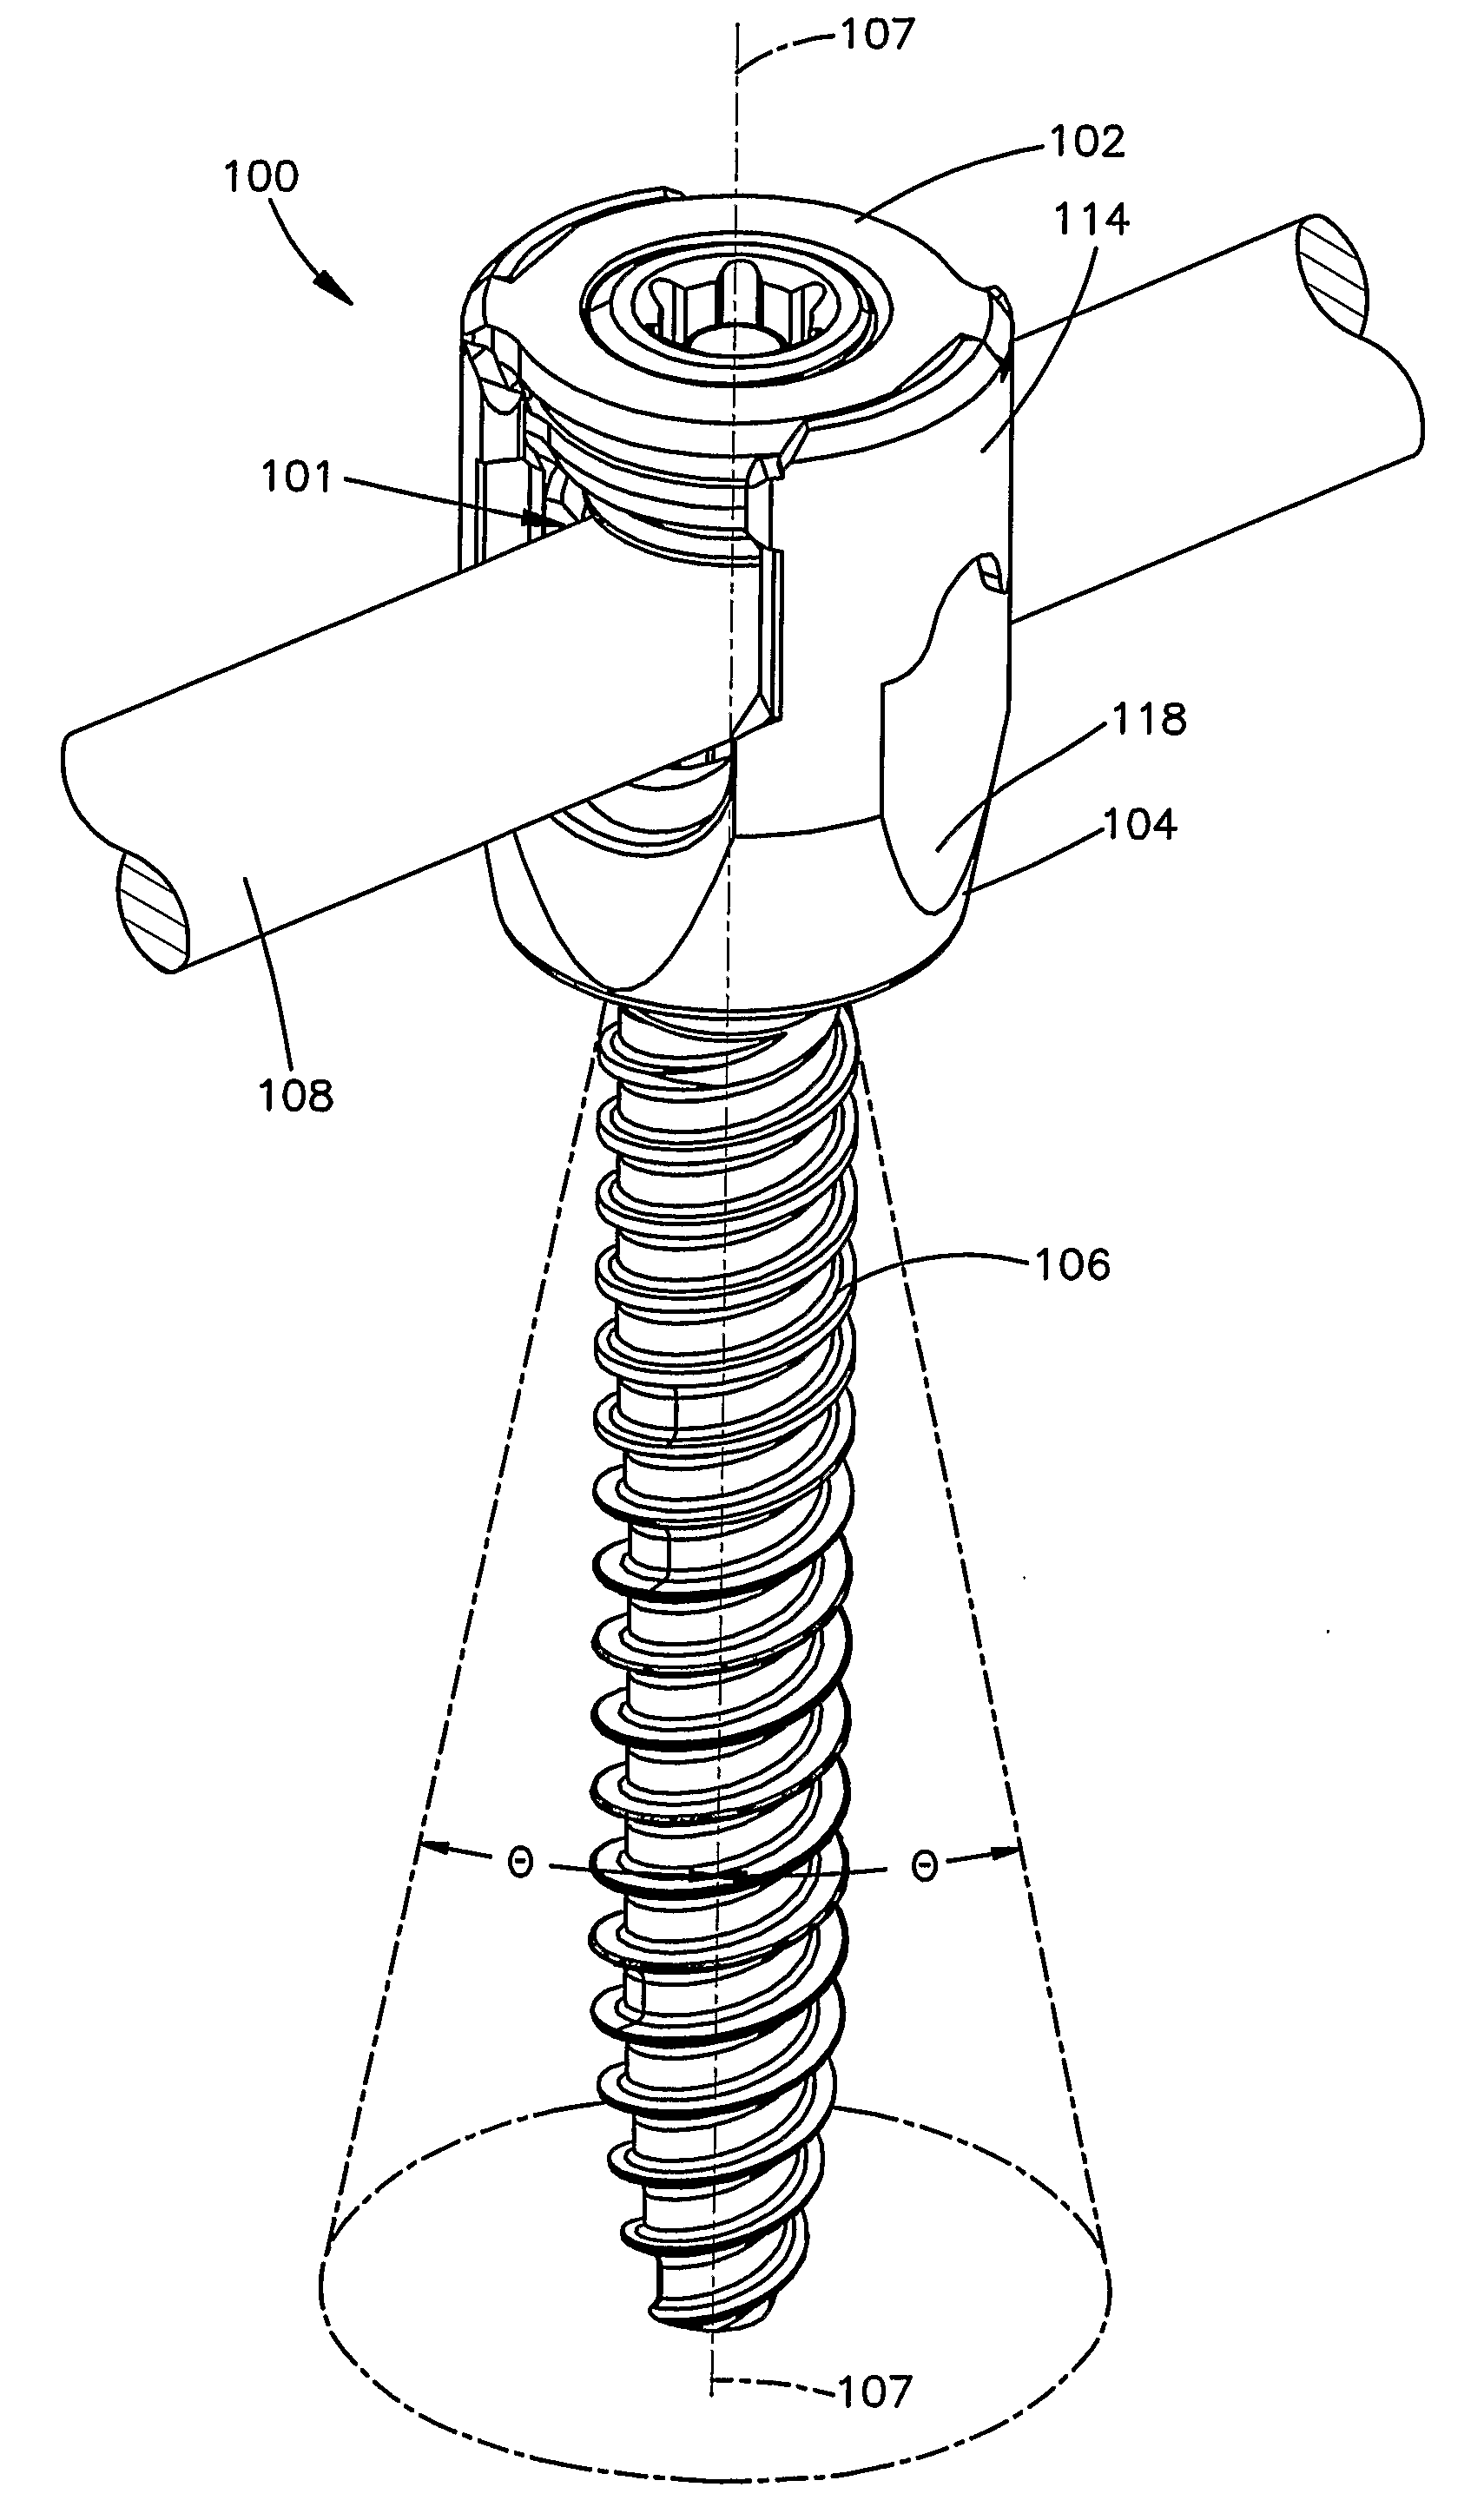 Bone Anchor With Locking Cap and Method of Spinal Fixation